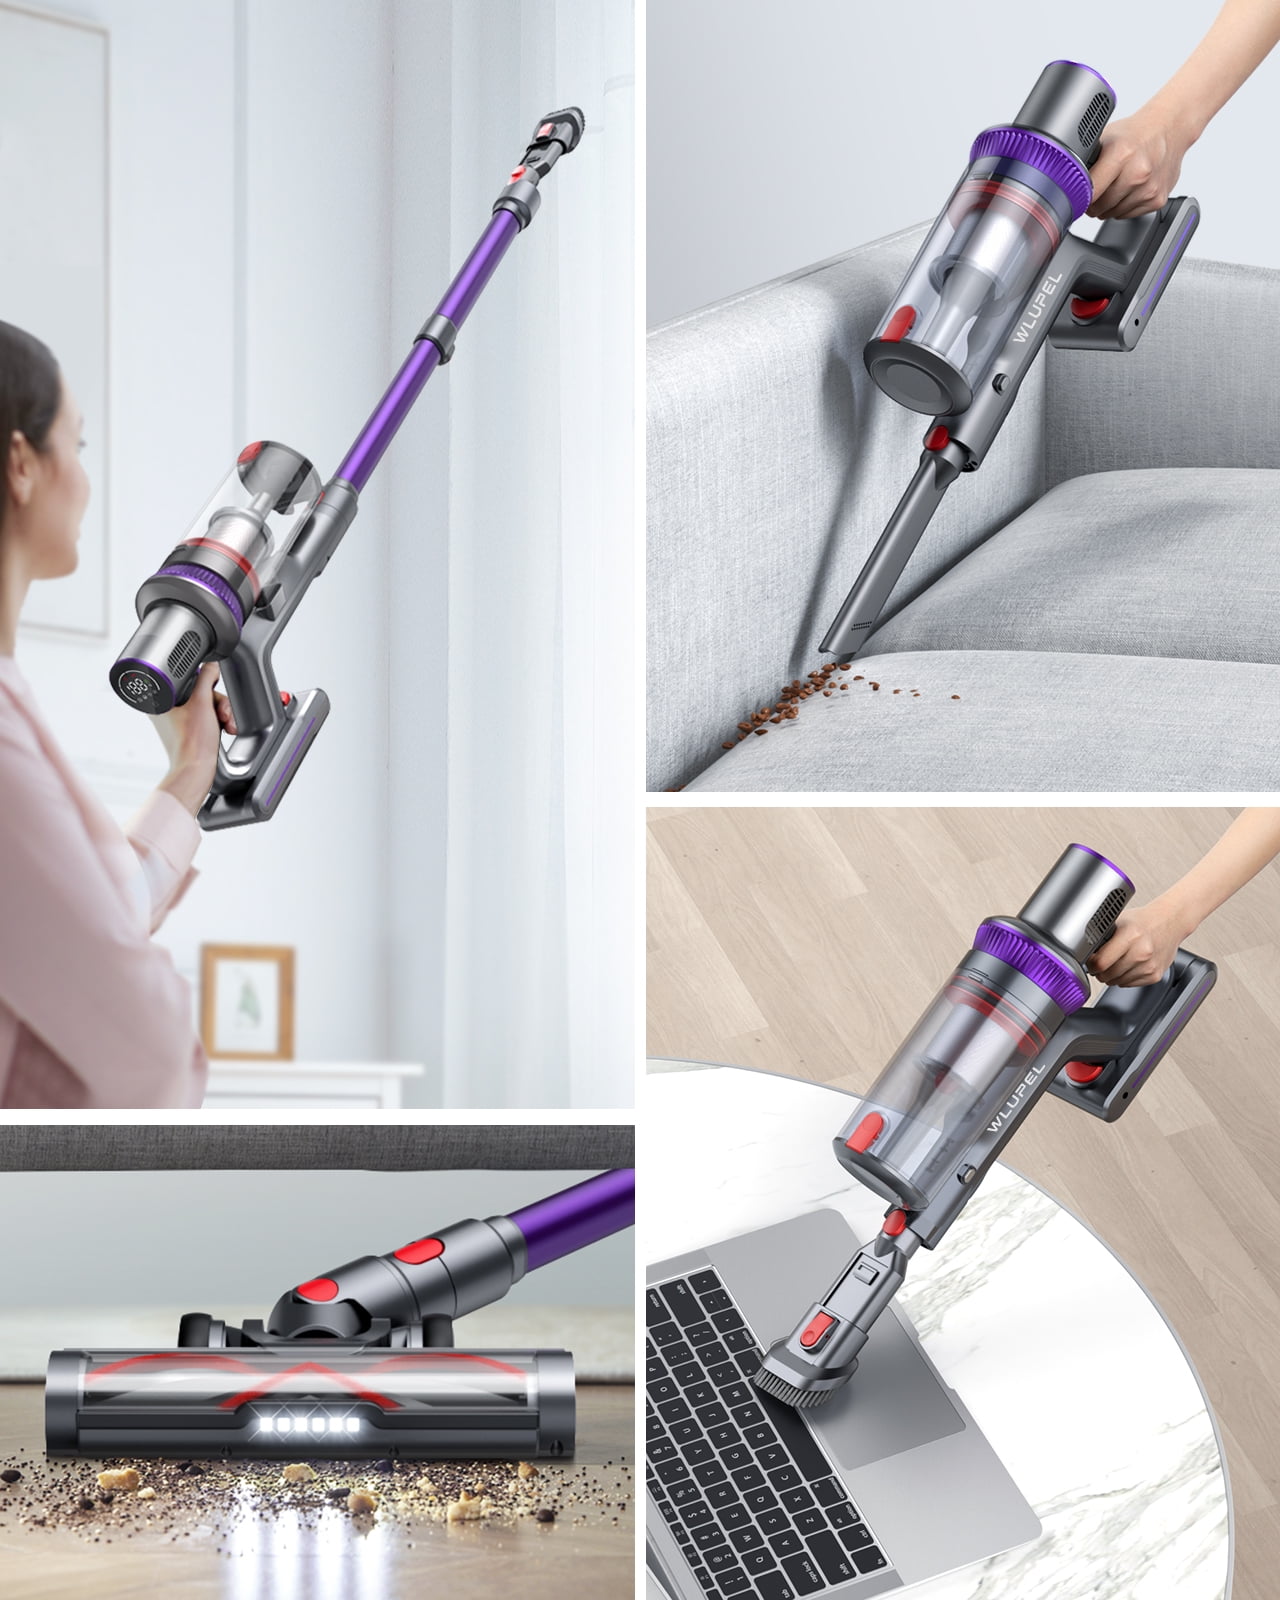  Laresar Cordless Vacuum Cleaner, 400W/33Kpa Stick Vacuum  Cleaner with Touch Screen, Up to 50 Mins Runtime, Handheld Anti-Tangle  Vacuum Cleaner, Edge Cleaning, Pet Hair, Carpet and Hardwood Floor